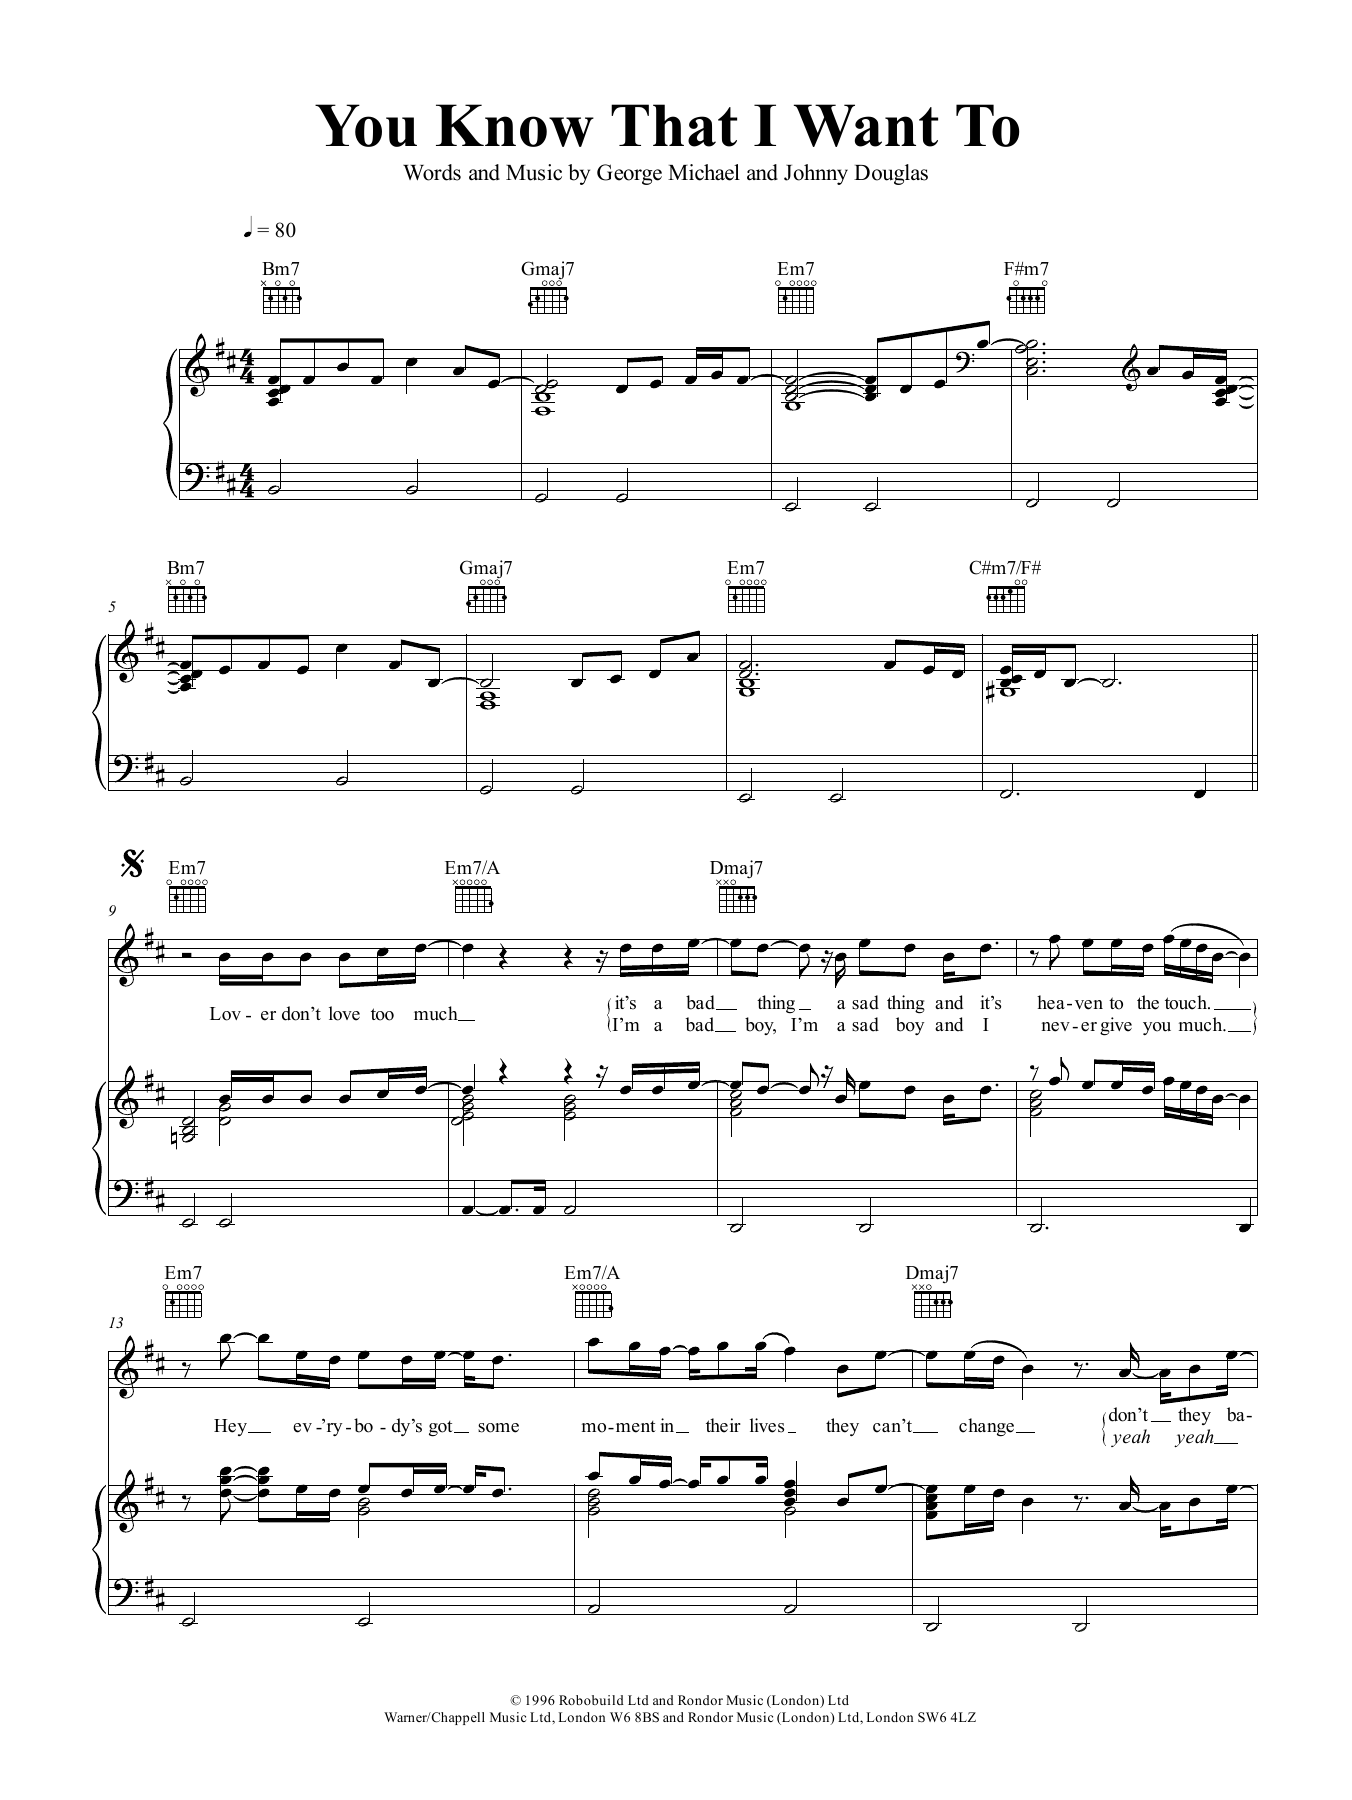 Download George Michael You Know That I Want To Sheet Music